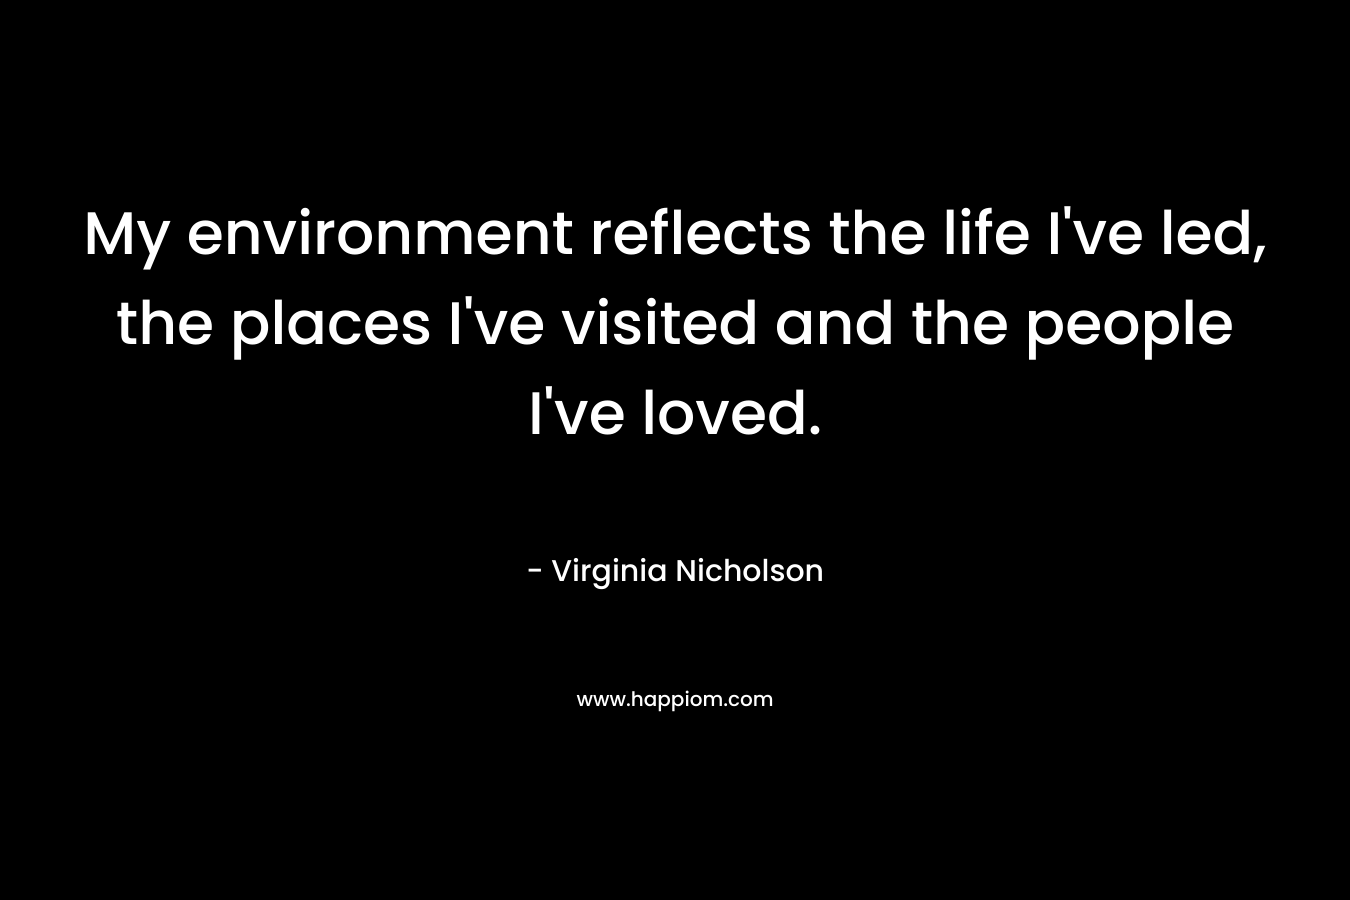 My environment reflects the life I’ve led, the places I’ve visited and the people I’ve loved. – Virginia Nicholson